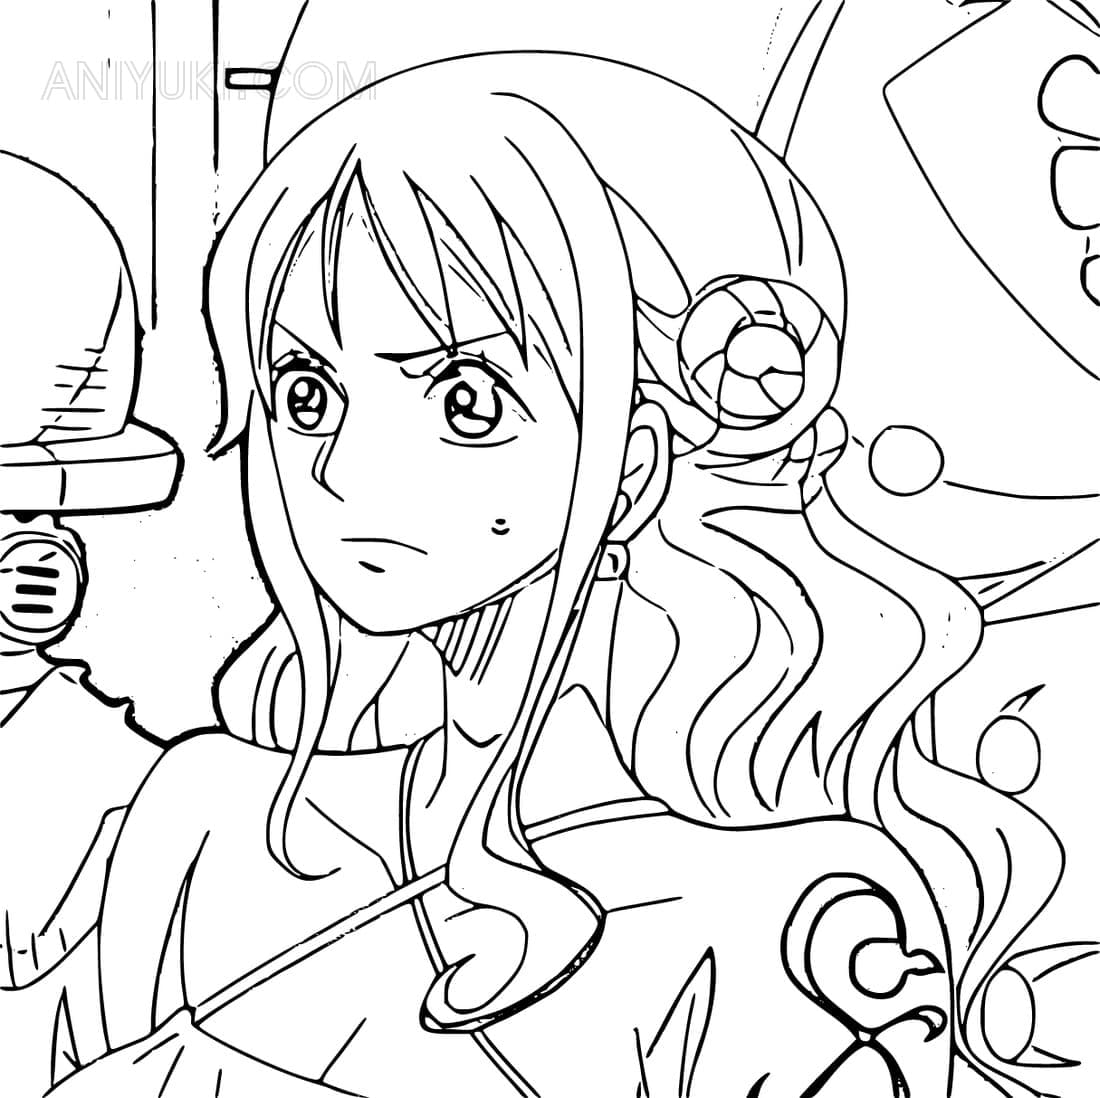 One Piece Coloring Pages - AniYuki - Anime Portal